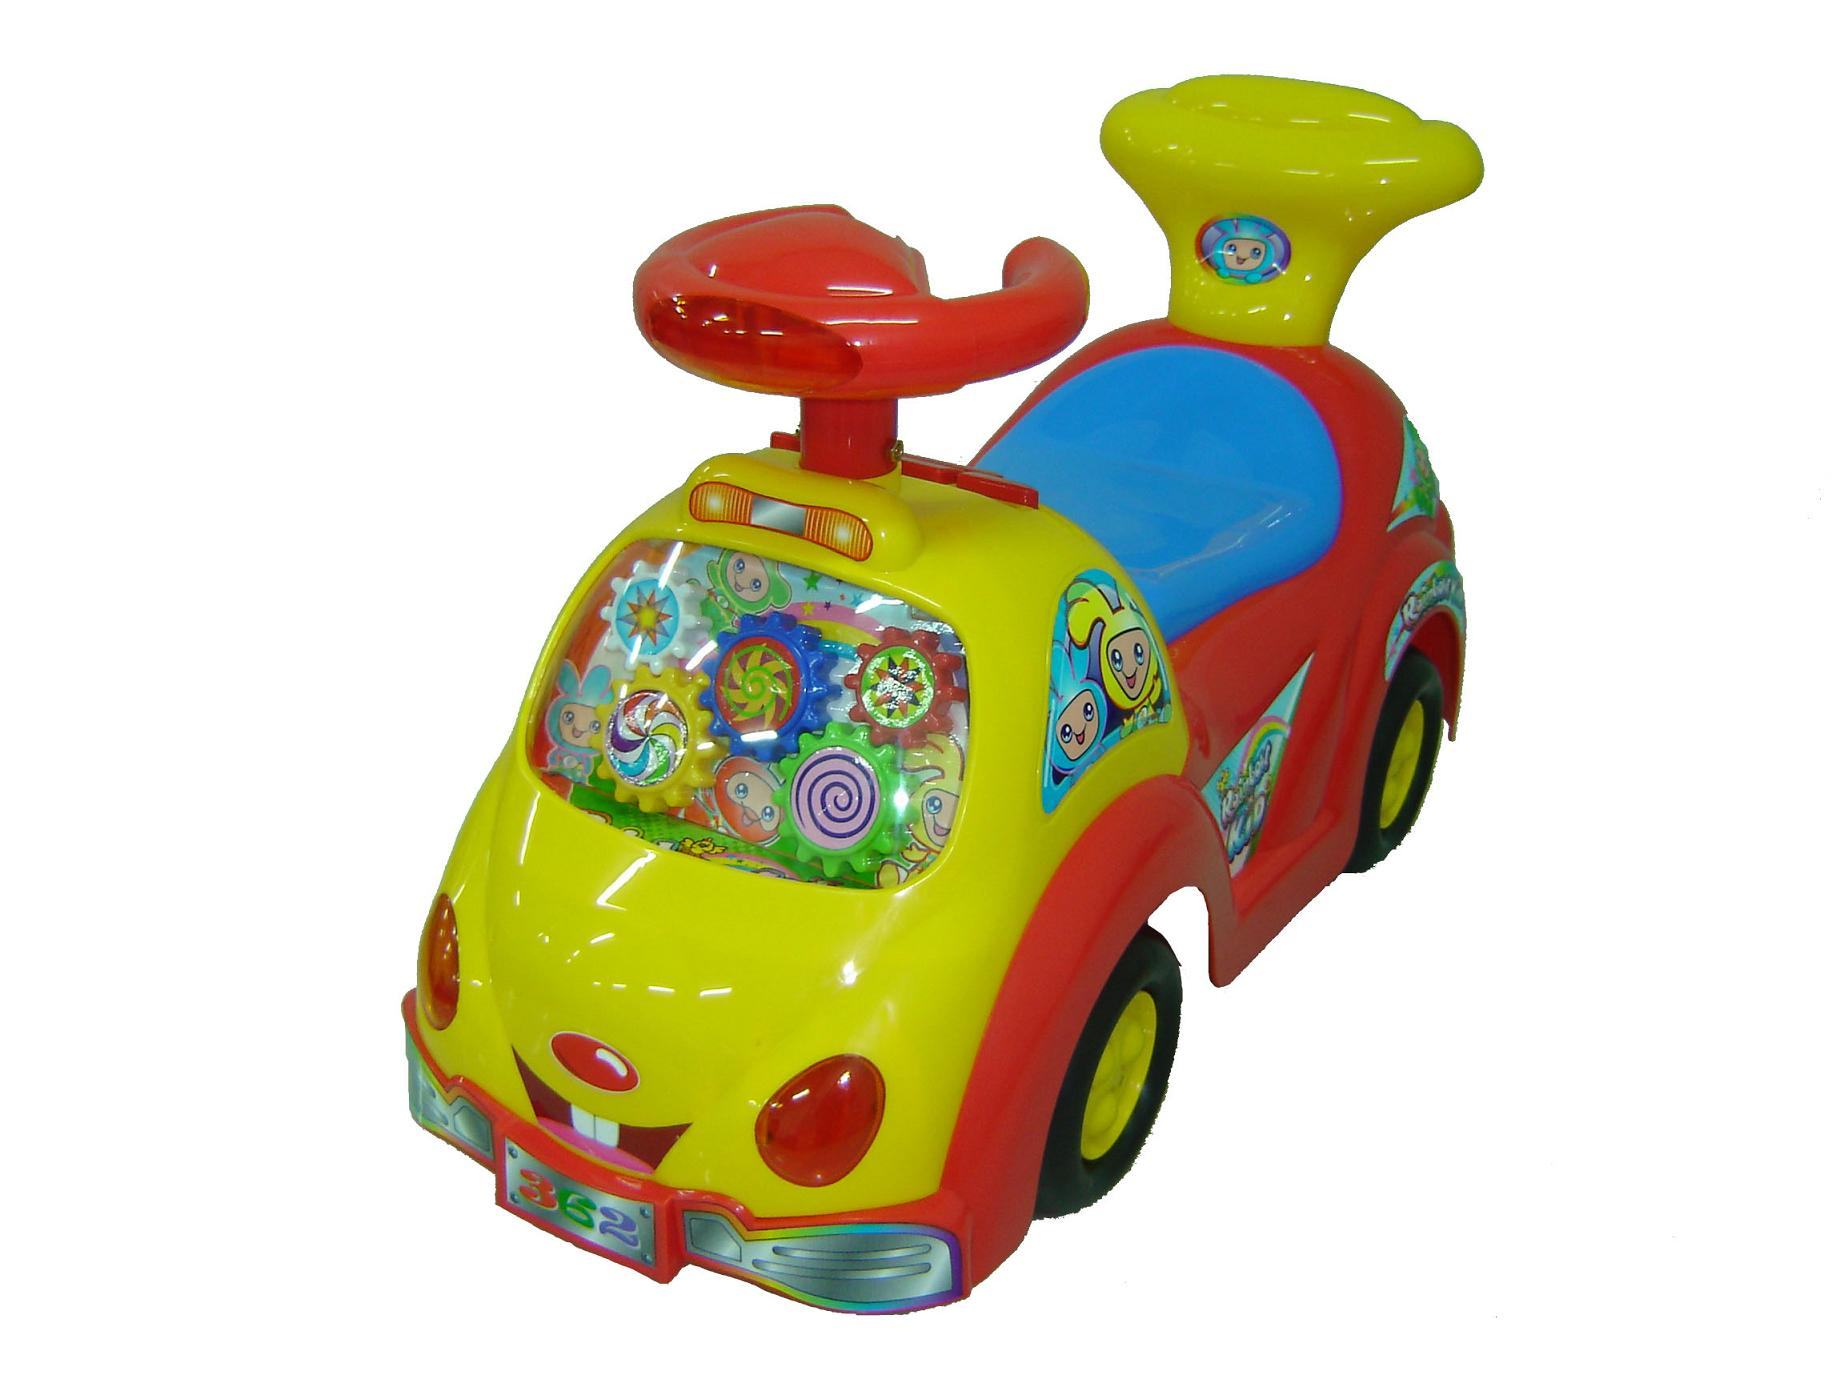 toys Wallpapers - Download free toys chicco plastic car toys kids ...